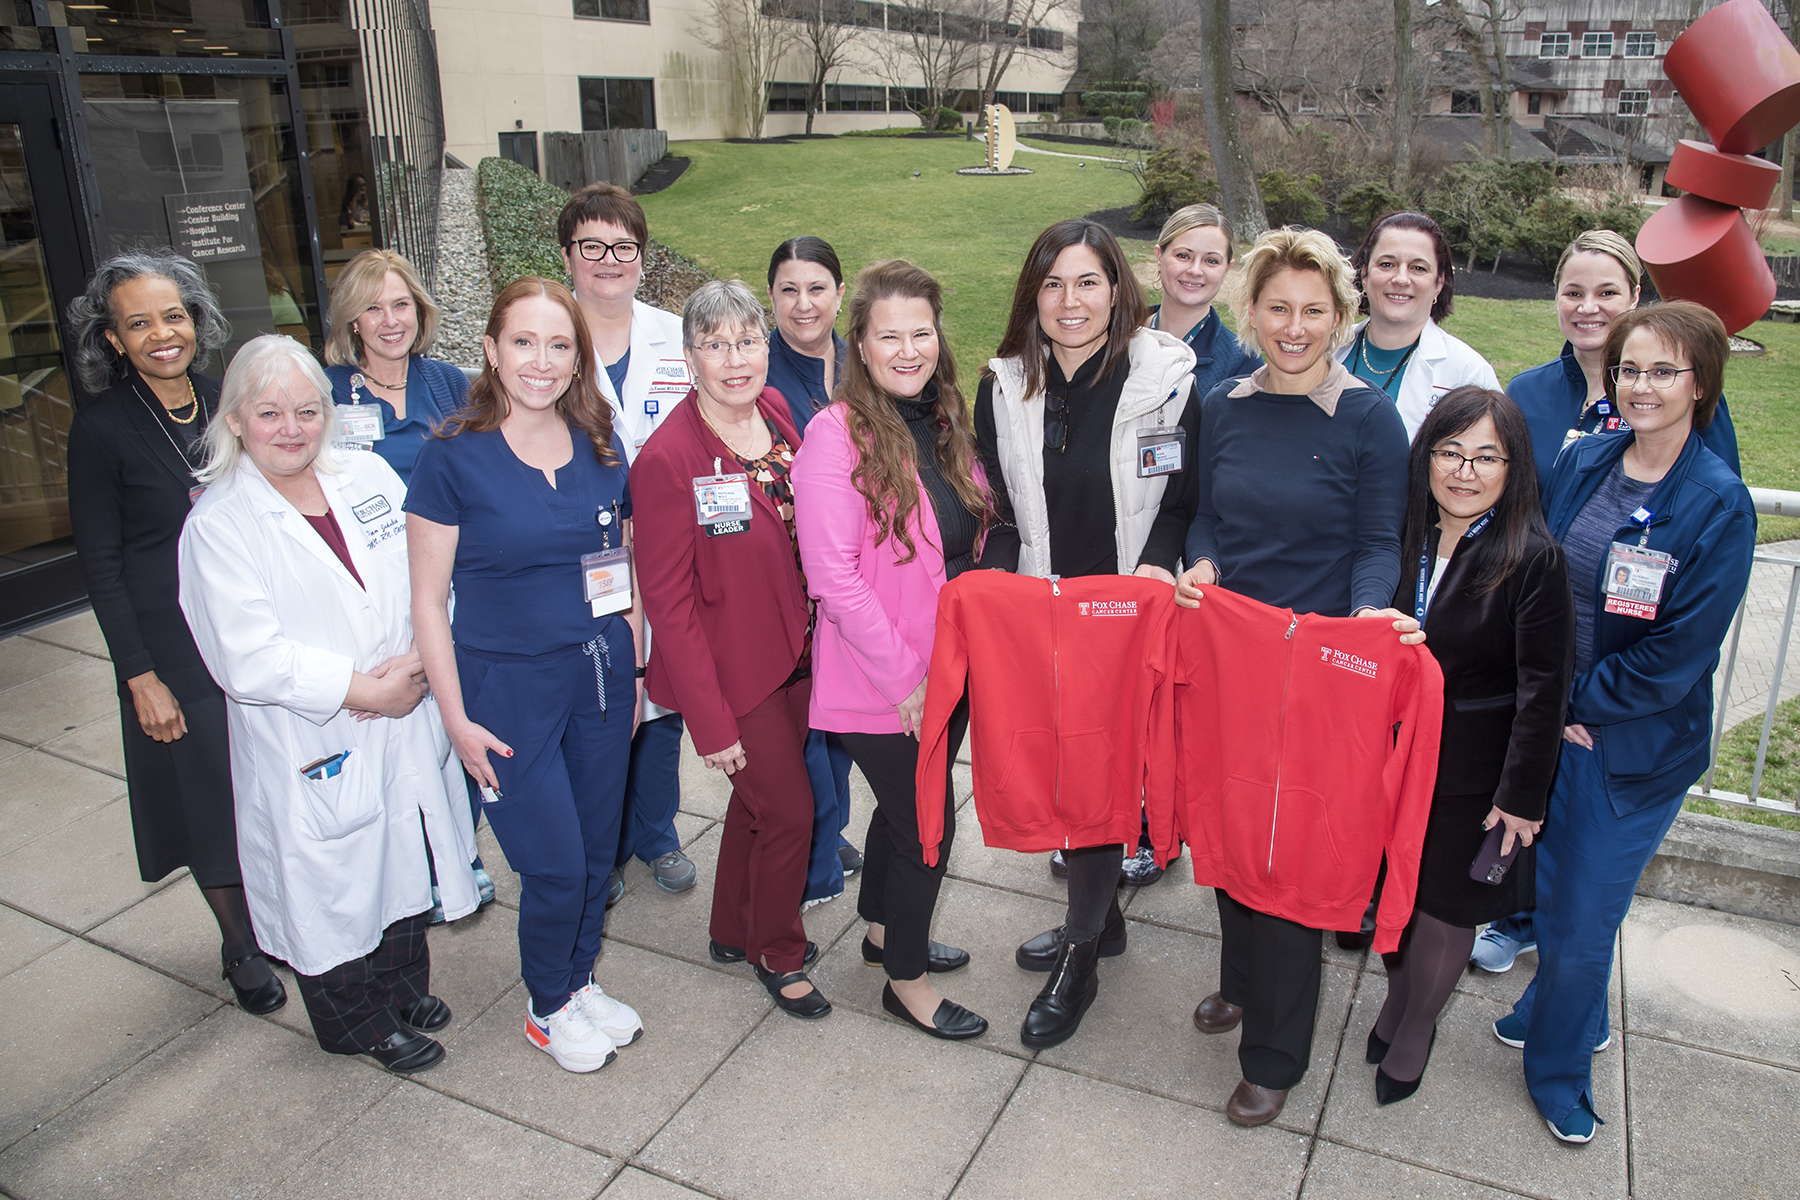 Group of nurses with two nurses holding red Temple sweatshirts in front of them